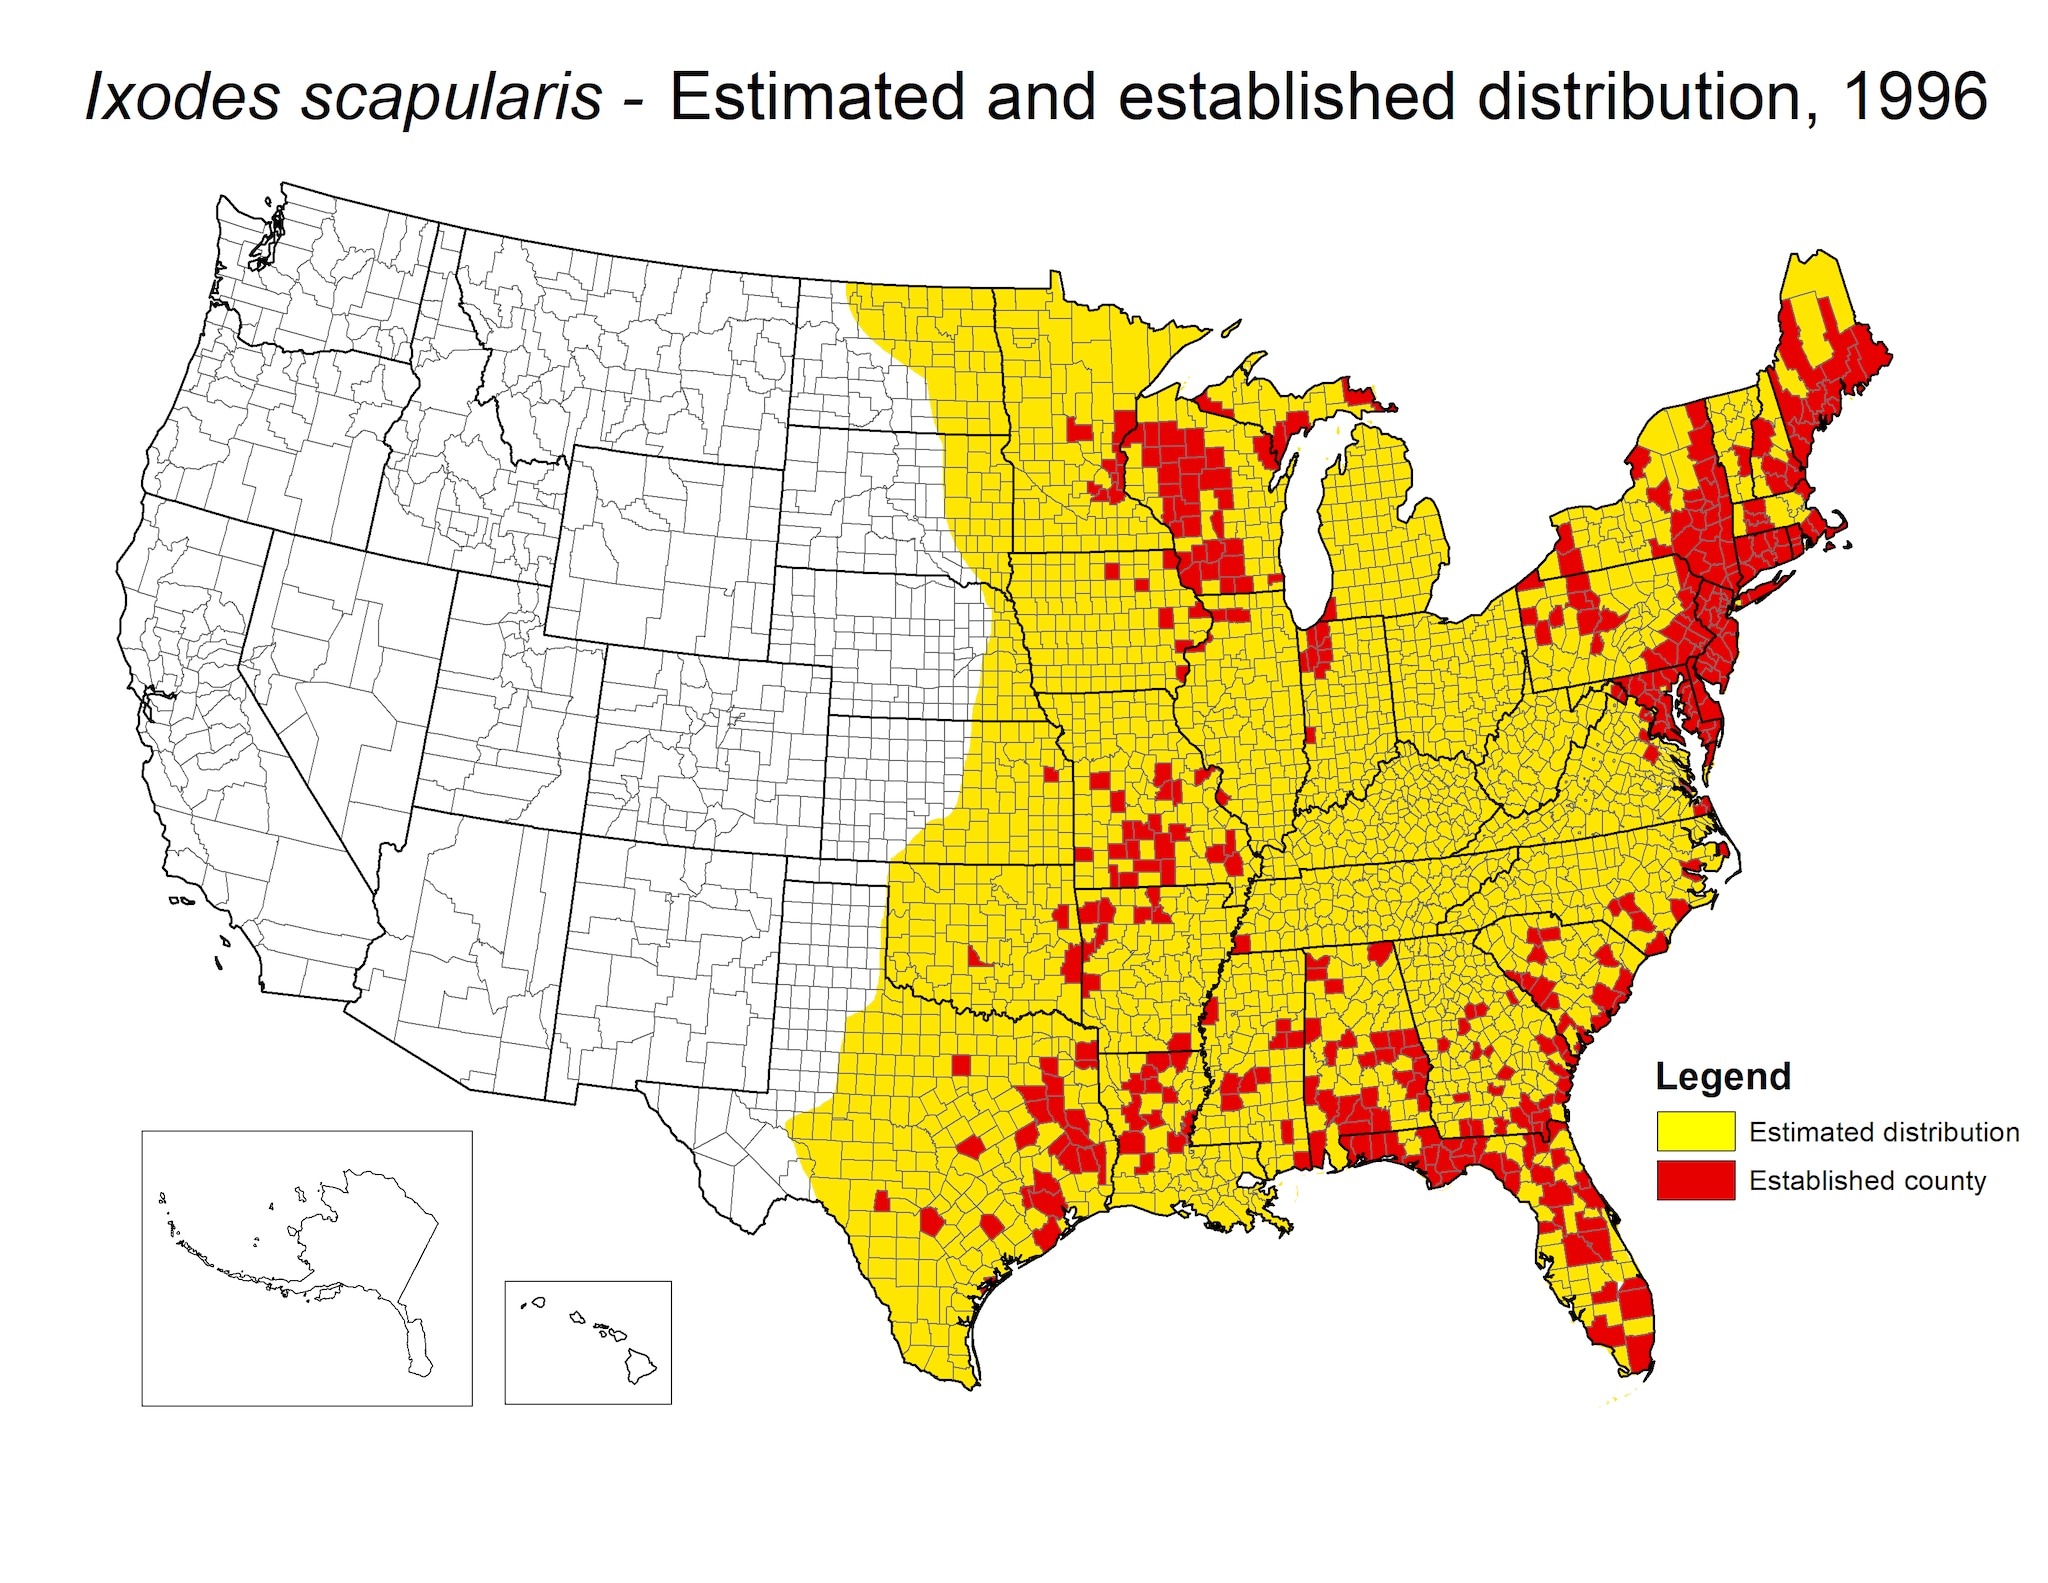 Map of U.S. showing distribution areas where the blacklegged tick could survive and reproduce for 1996. See spreadsheet below for data.